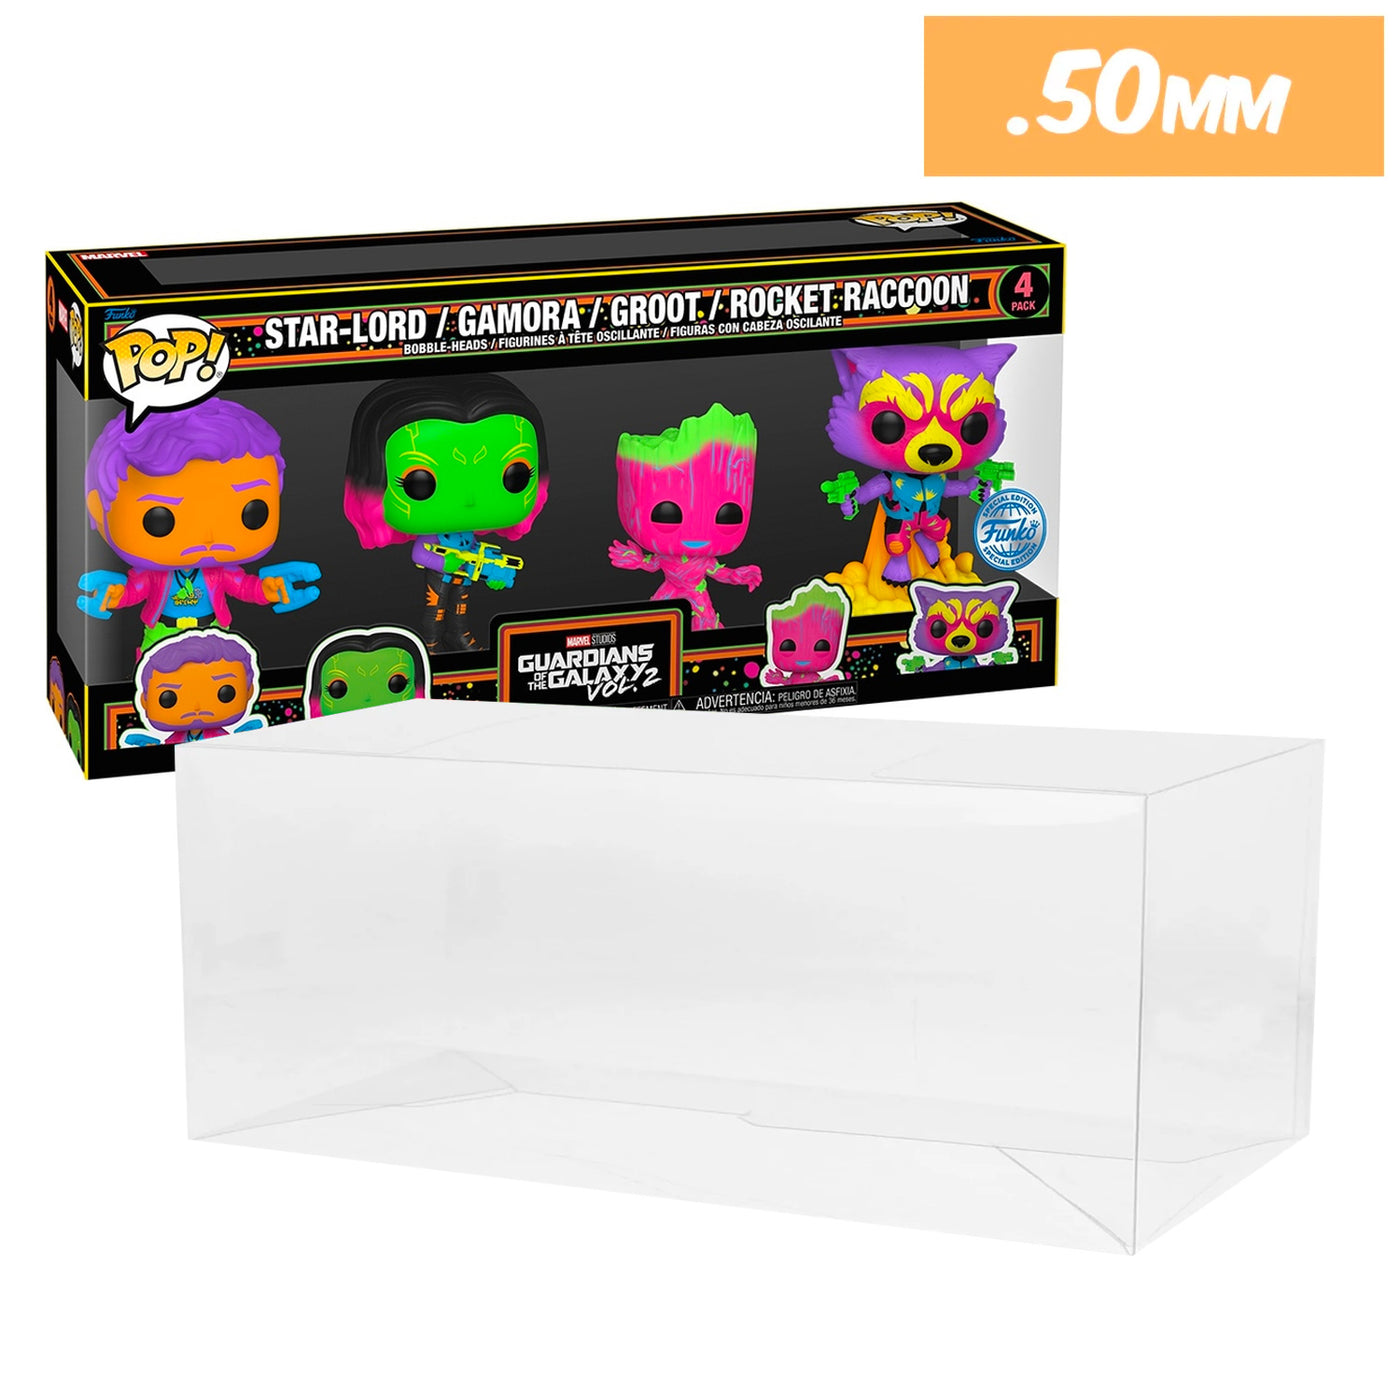 marvel blacklight guardians of the galaxy 4 pack best funko pop protectors thick strong uv scratch flat top stack vinyl display geek plastic shield vaulted eco armor fits collect protect display case kollector protector